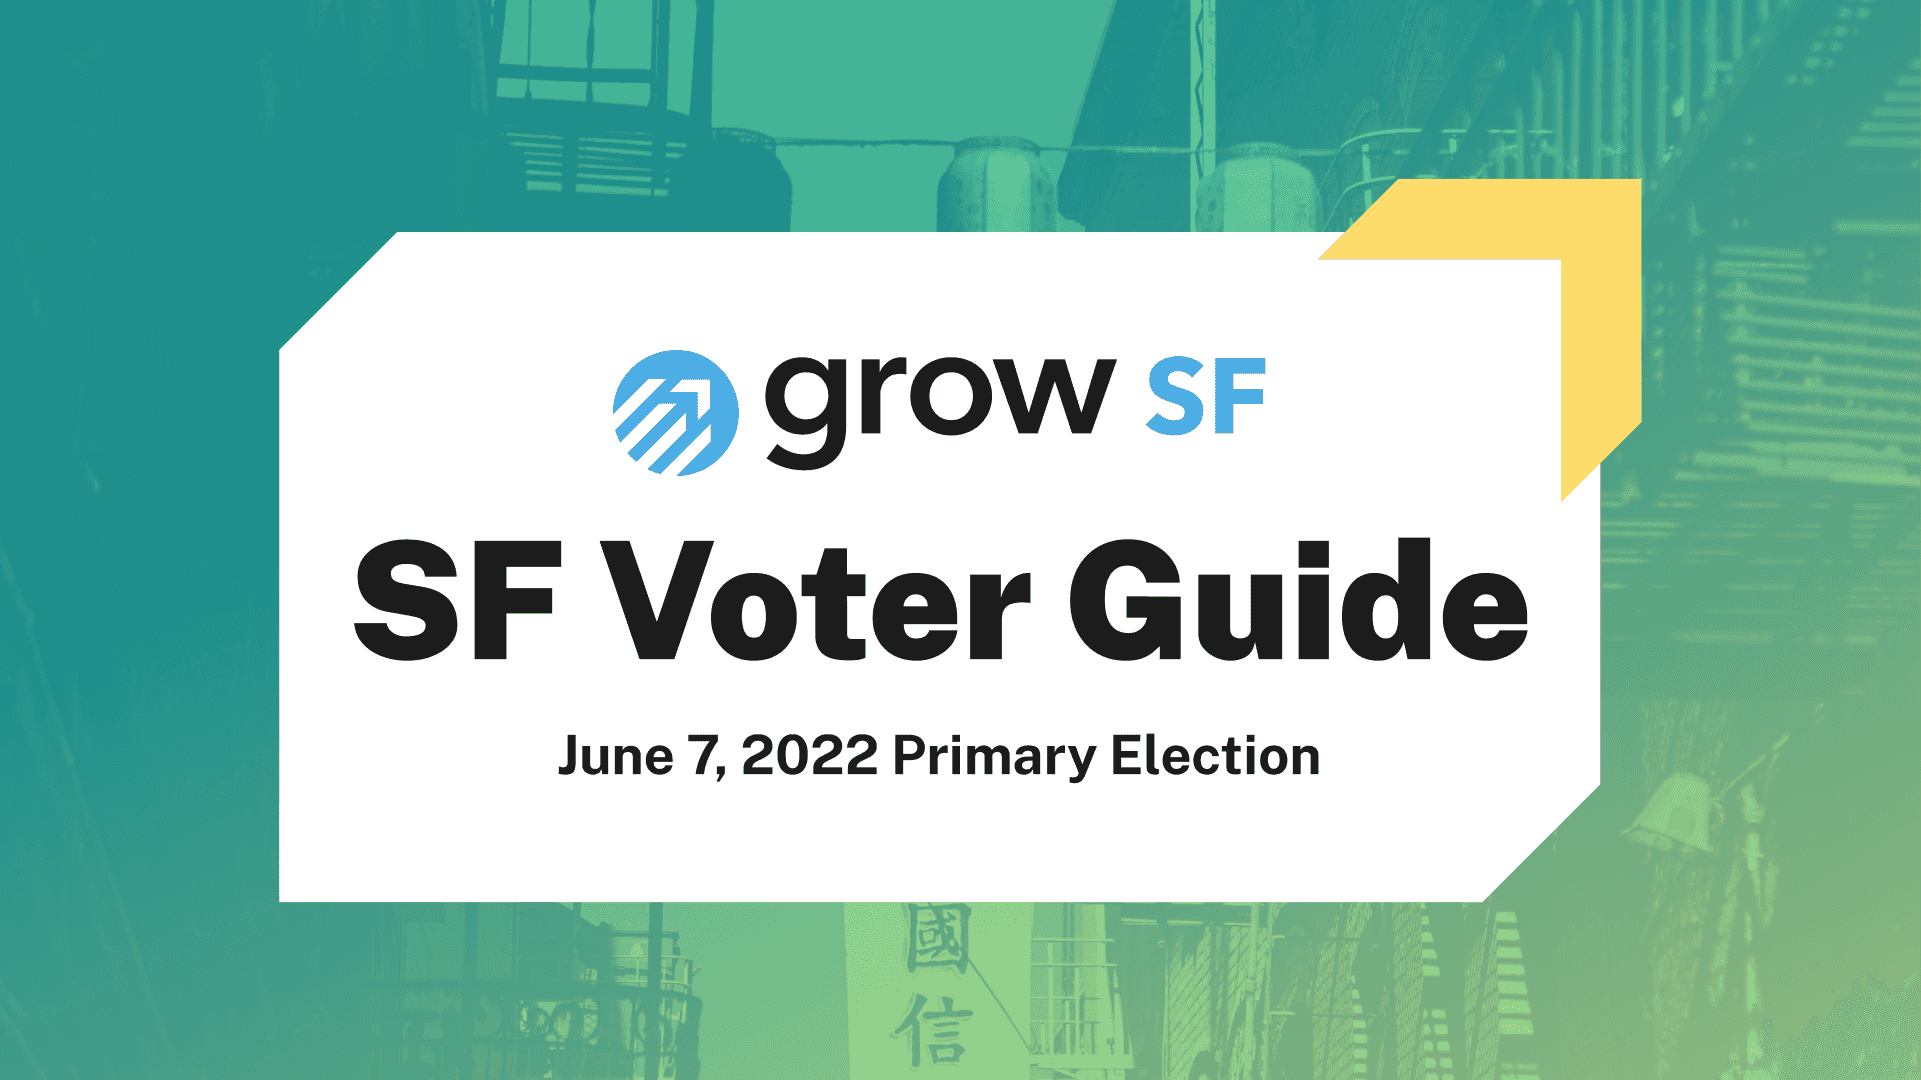 GrowSF San Francisco Voter Guide for the June 7, 2022 Primary Election